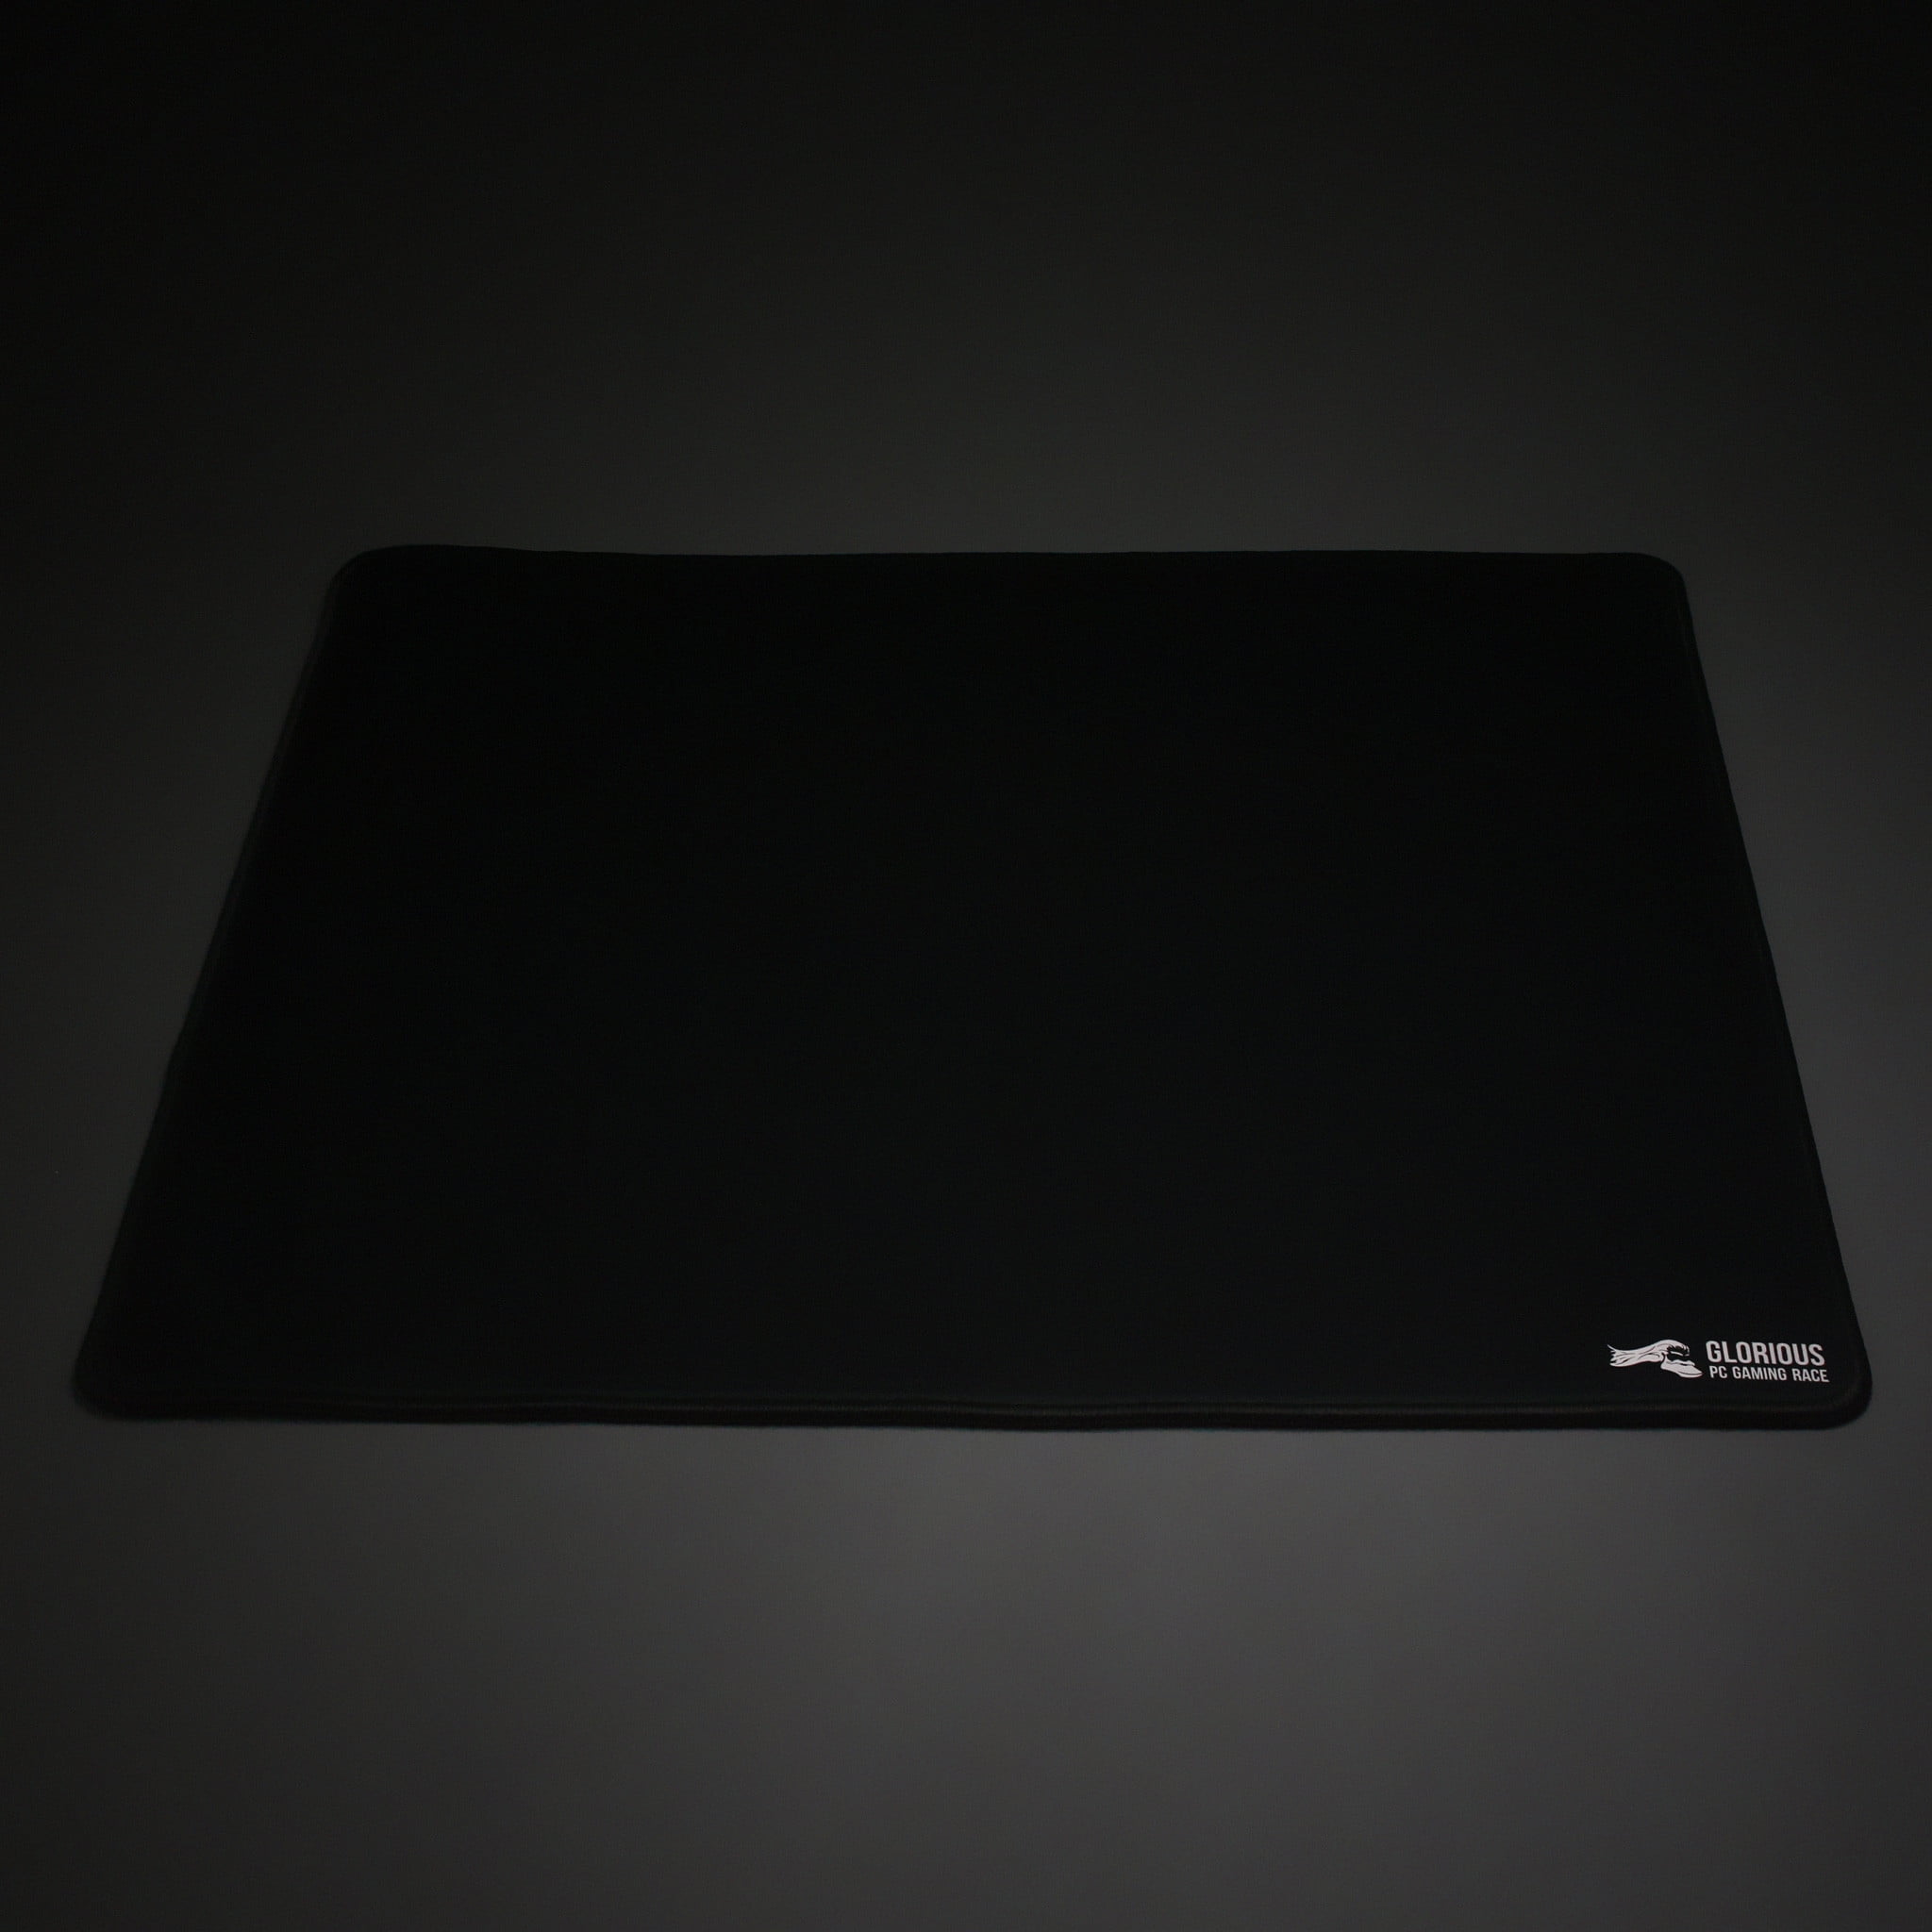 glorious gaming mouse pad / mouse mats xl, xxl, 3xl) (black and white) - Walmart.com